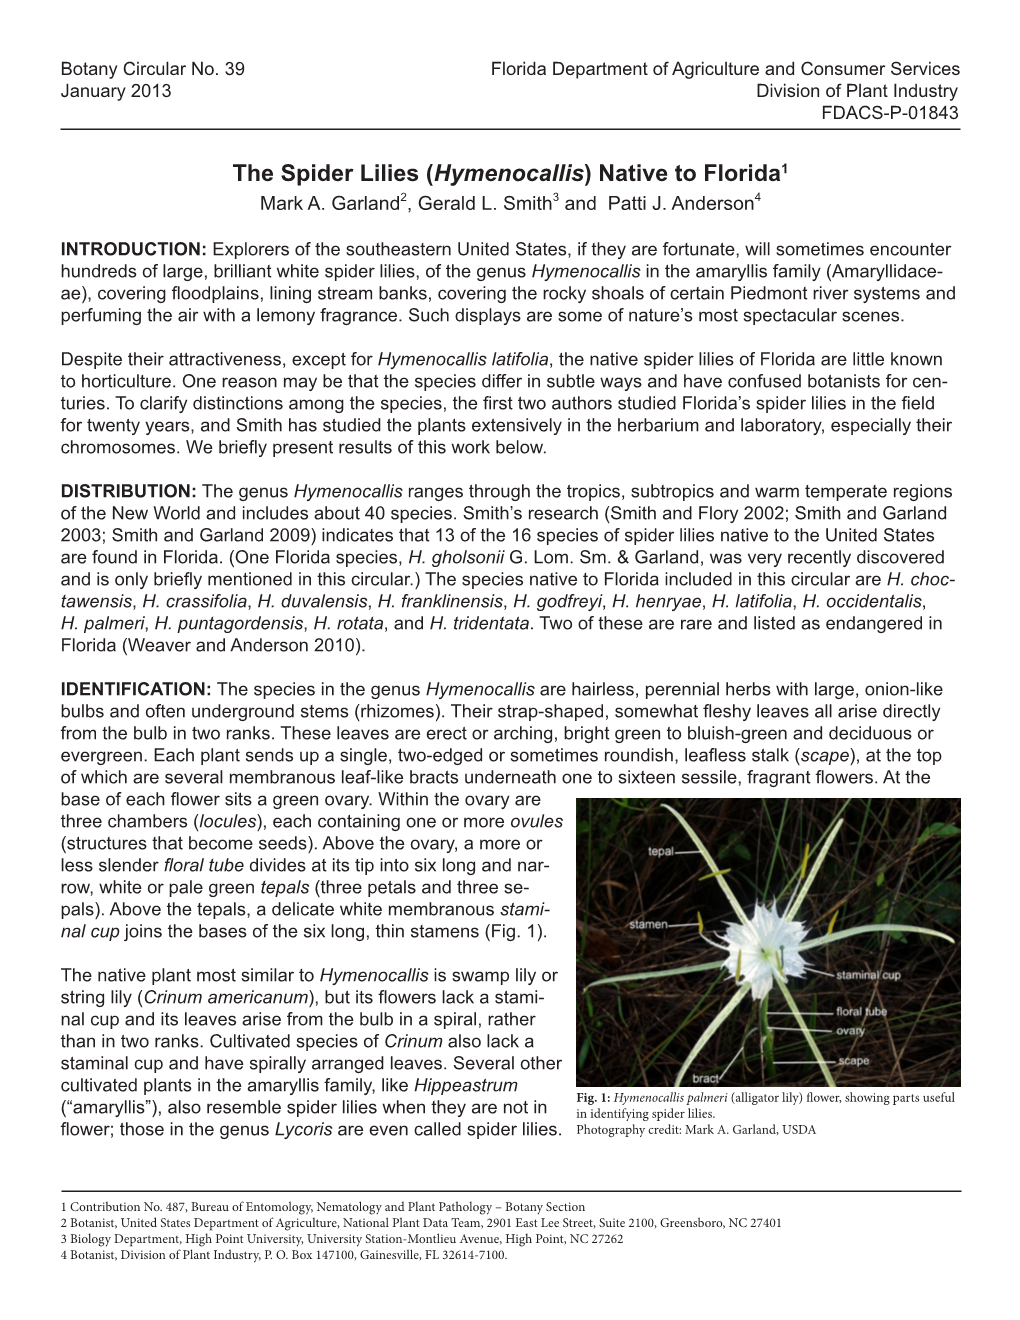 The Spider Lilies (Hymenocallis) Native to Florida1 Mark A